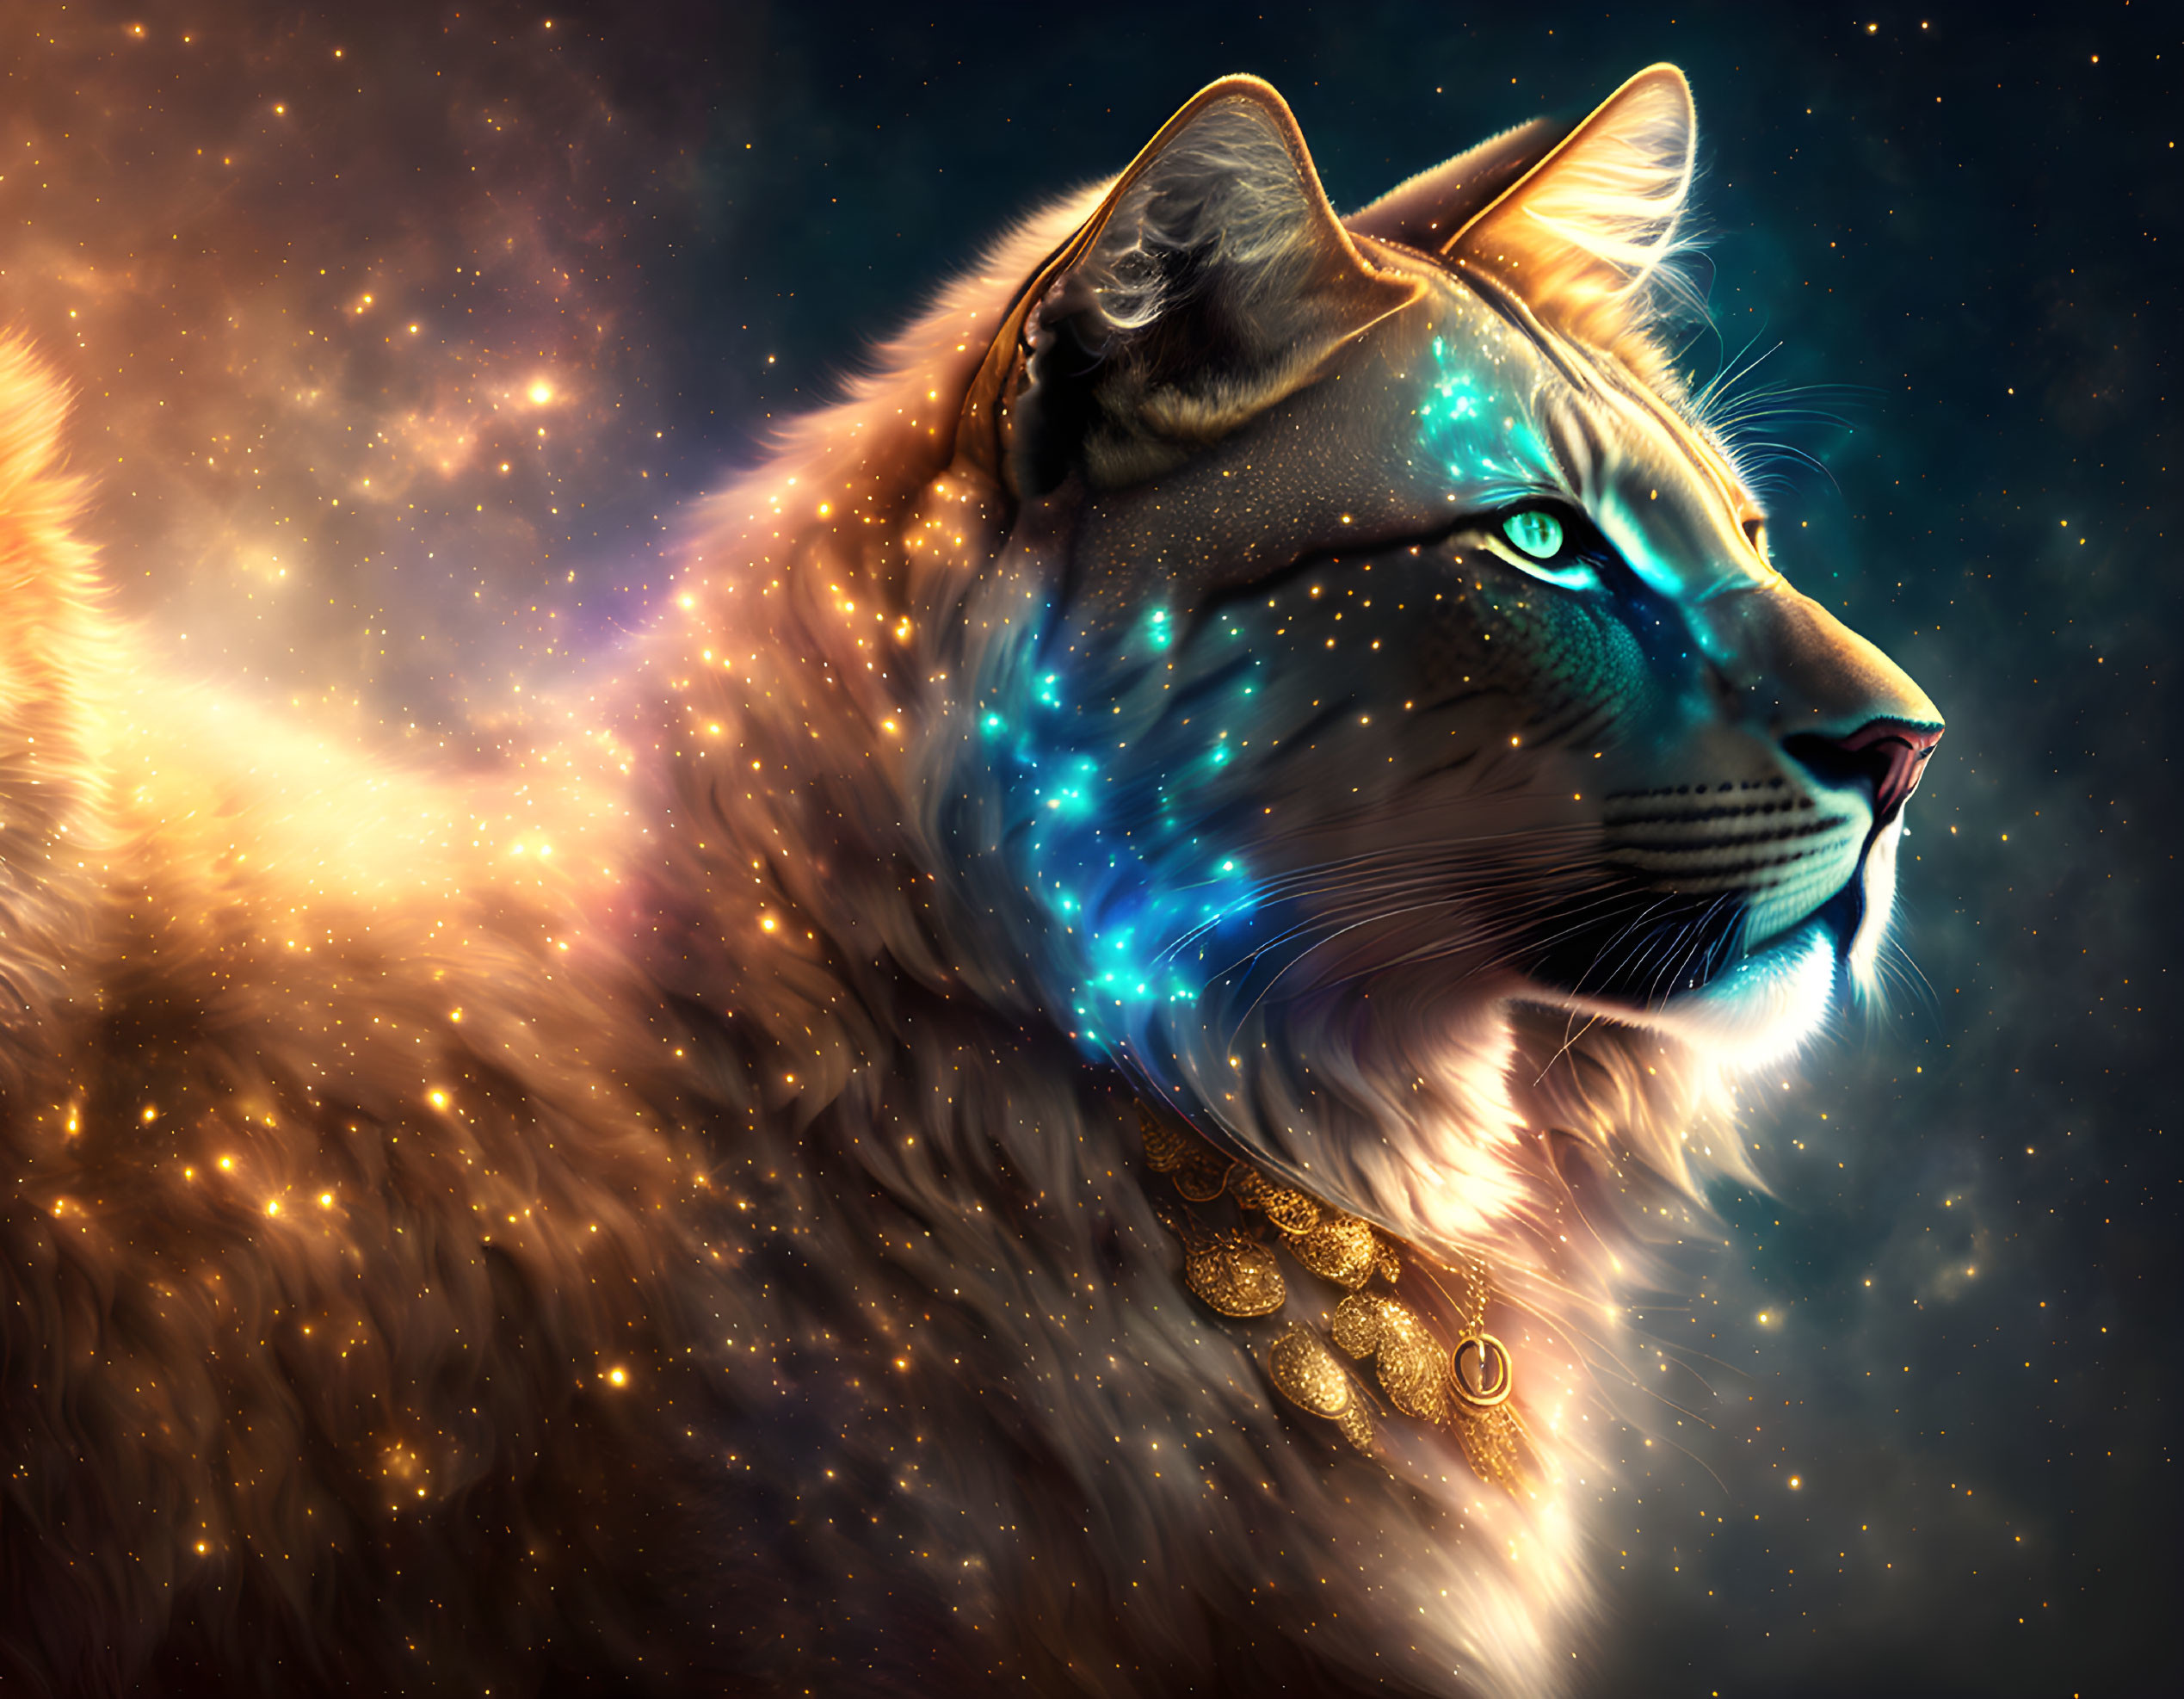 Majestic cosmic cat with star-filled fur and glowing blue eyes in nebula backdrop